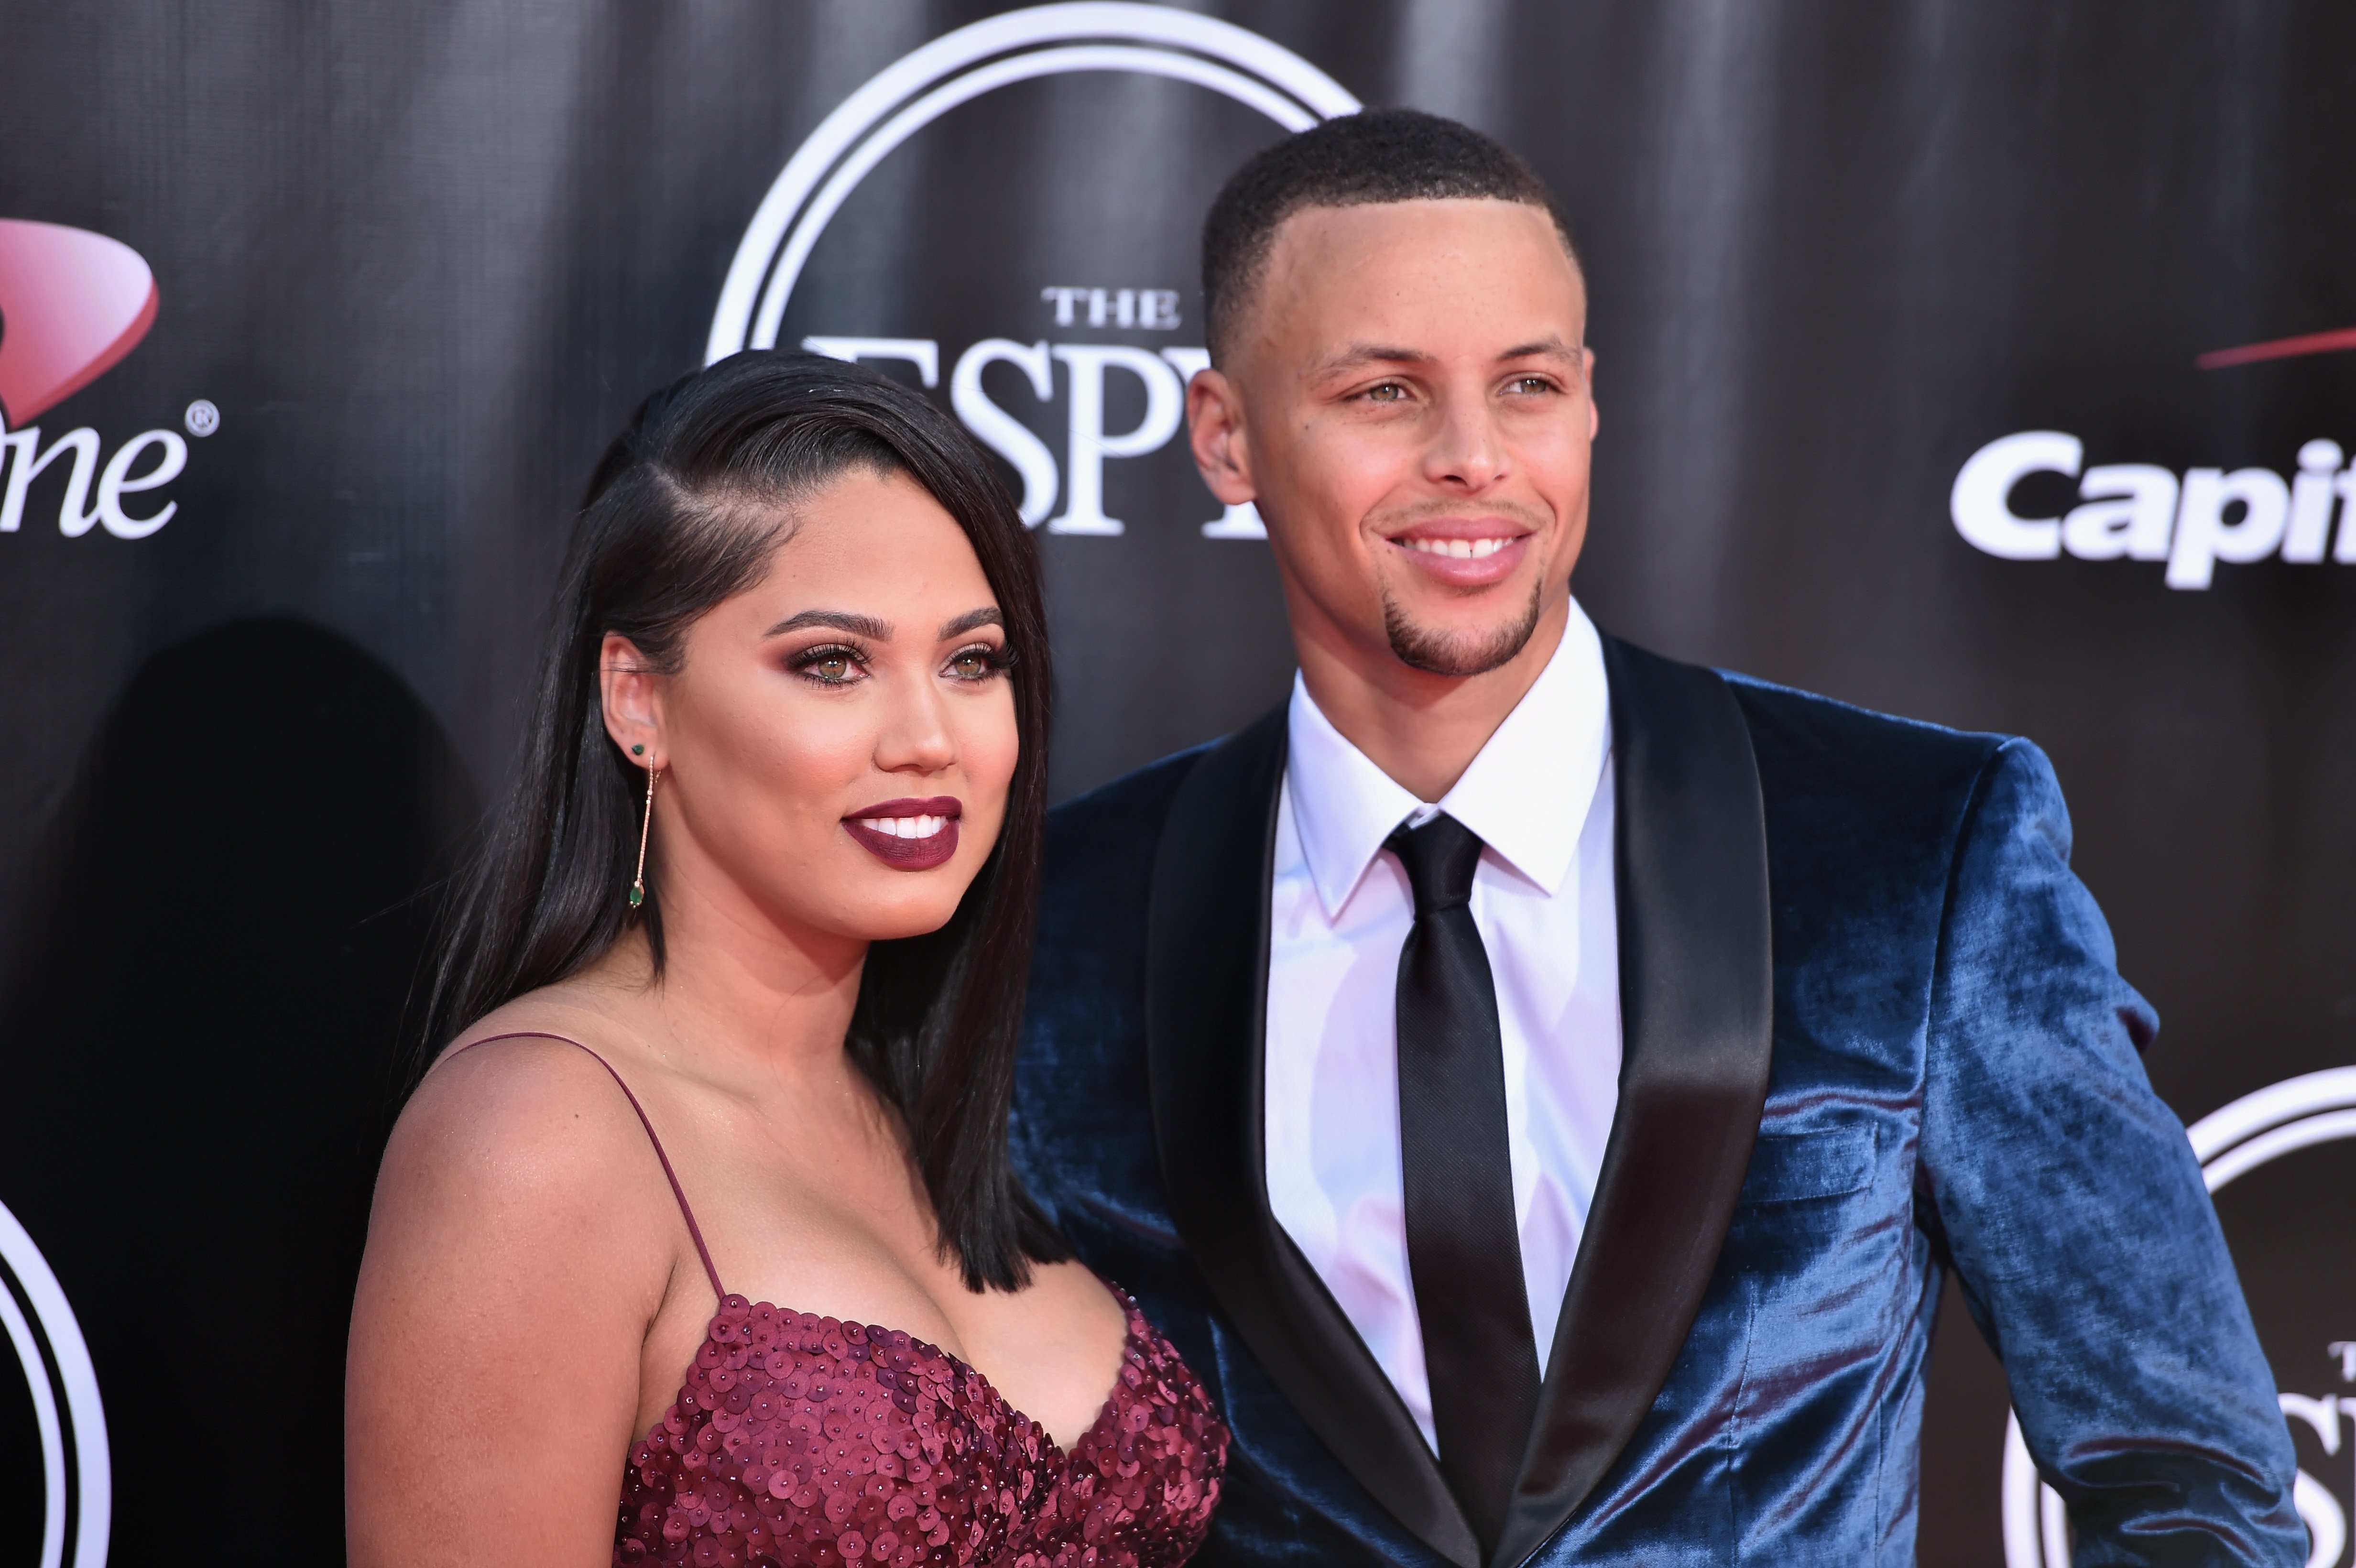 Stephen and Ayesha Curry at the 2016 ESPYS at Microsoft Theater on July 13, 2016 in Los Angeles, California. |Source: Getty Images